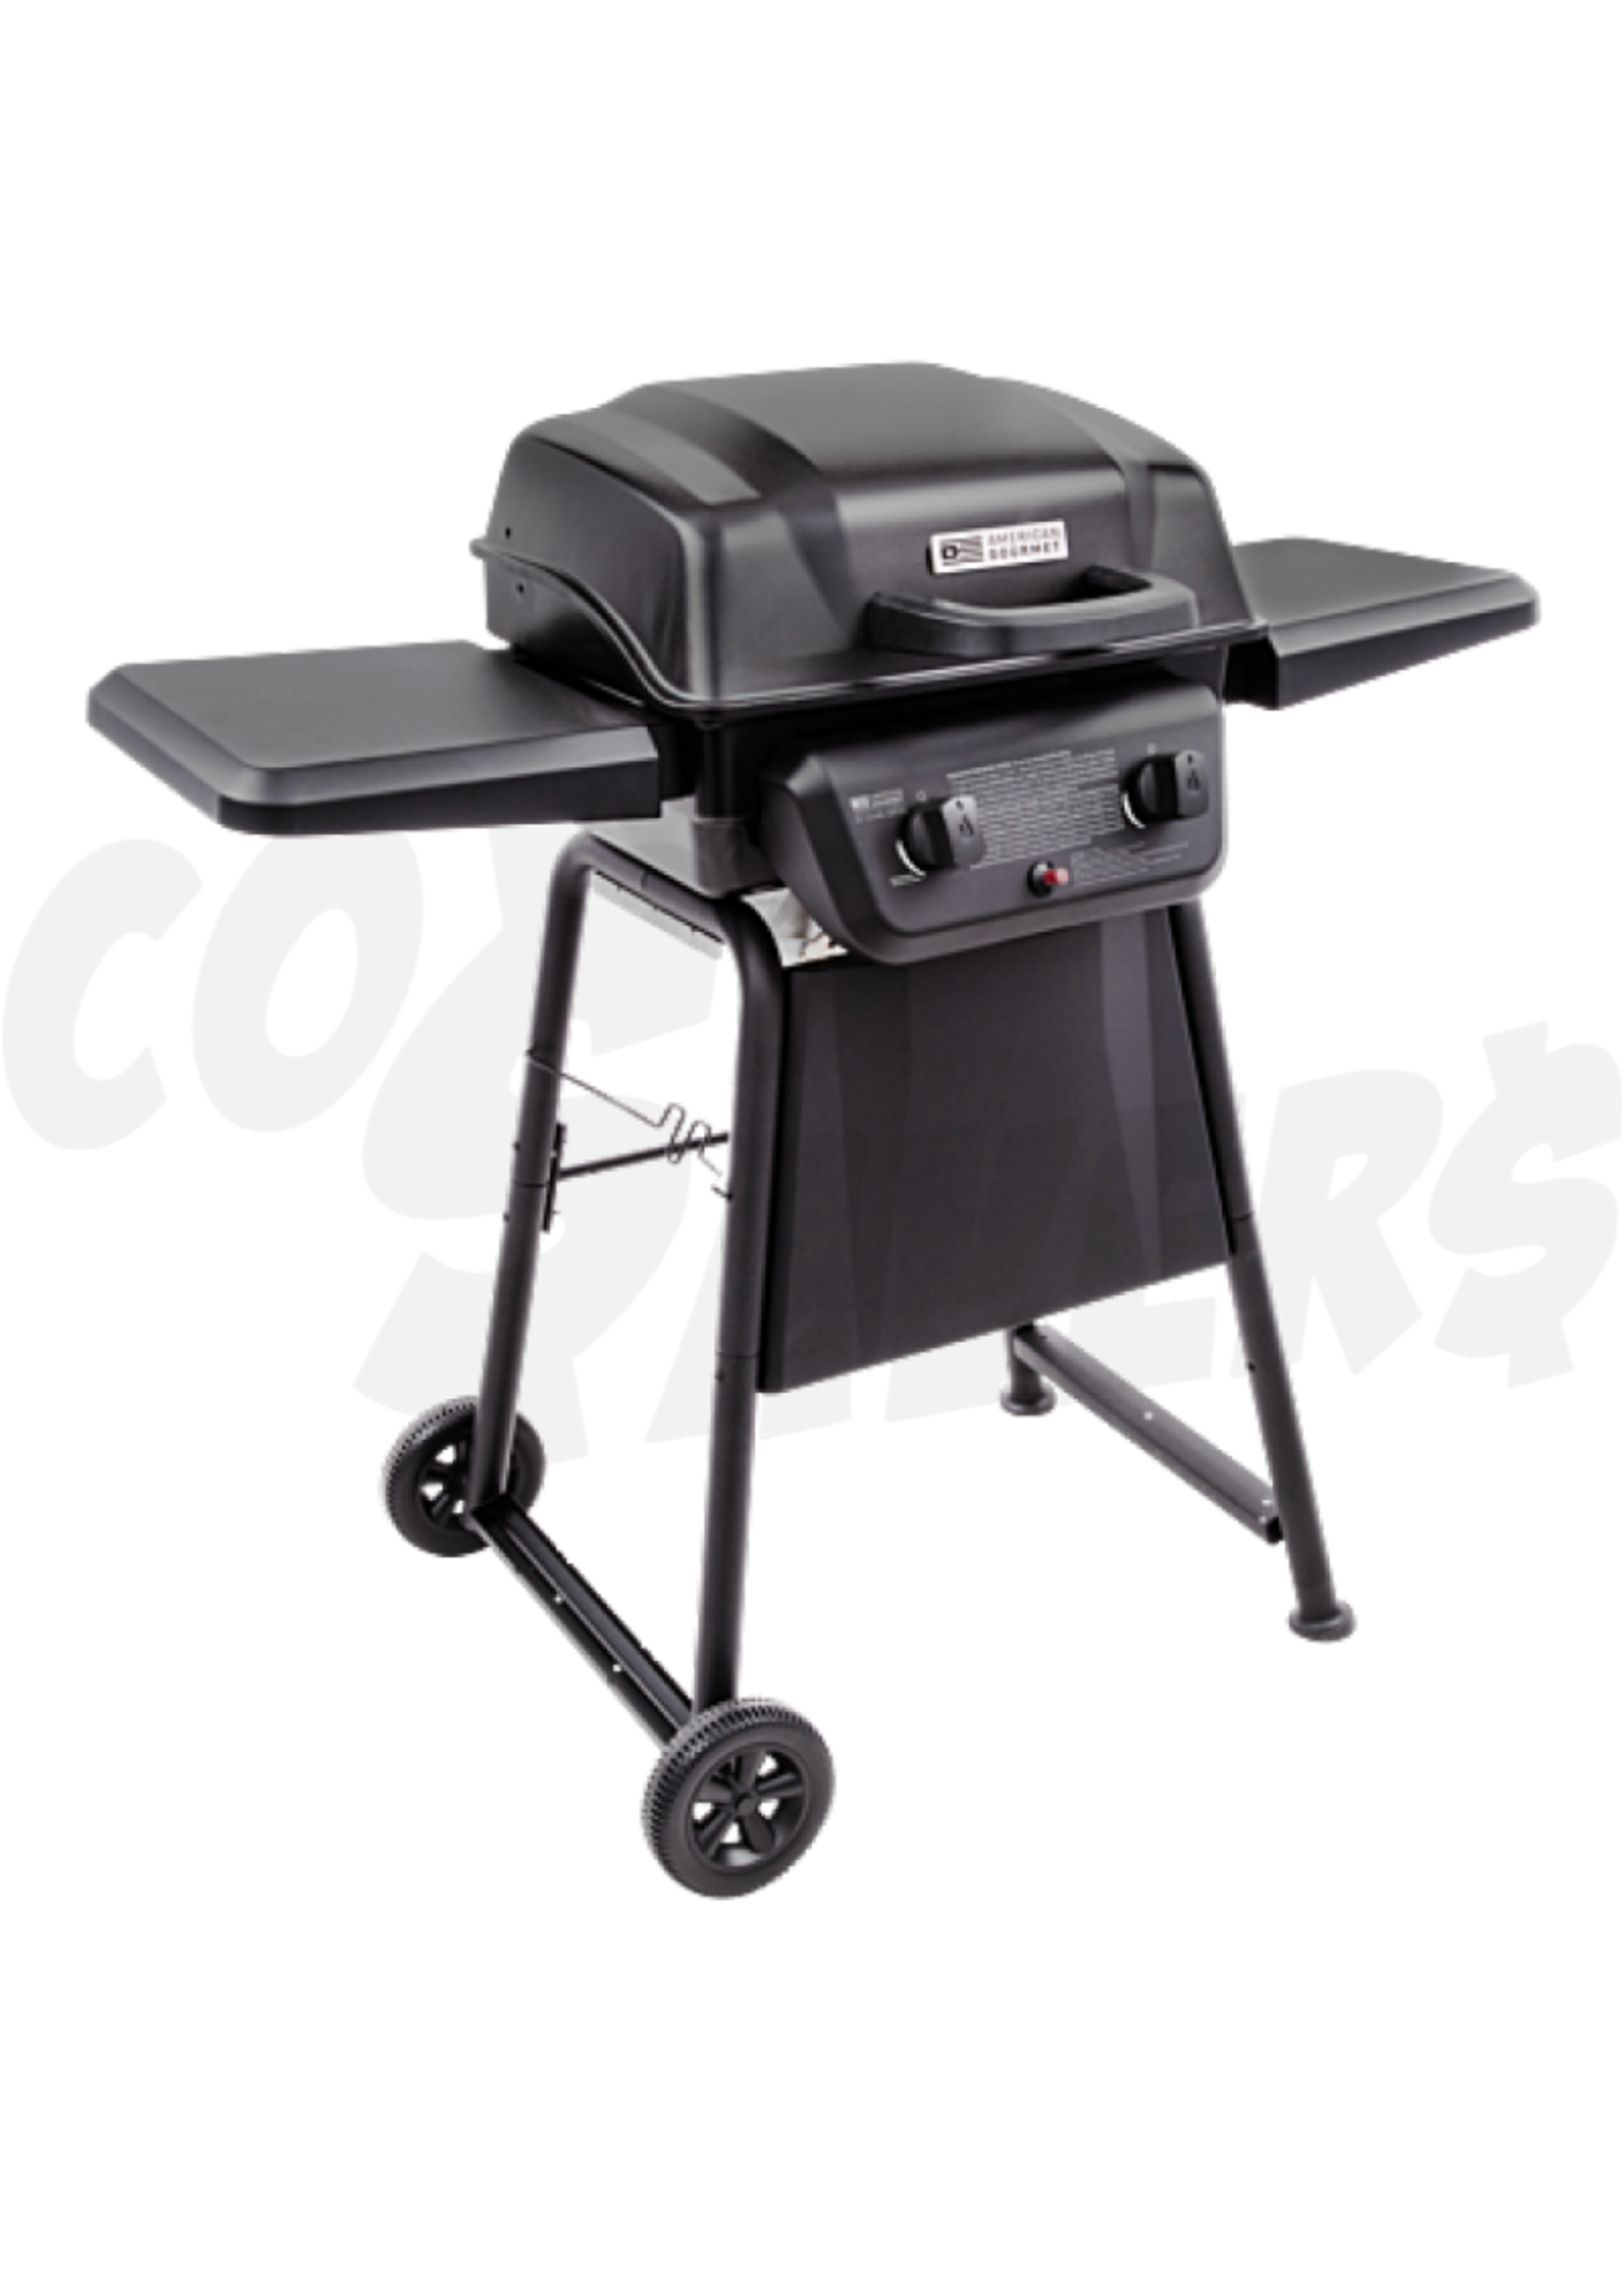 American Gourmet 2 Burner Gas Barbecue Grill